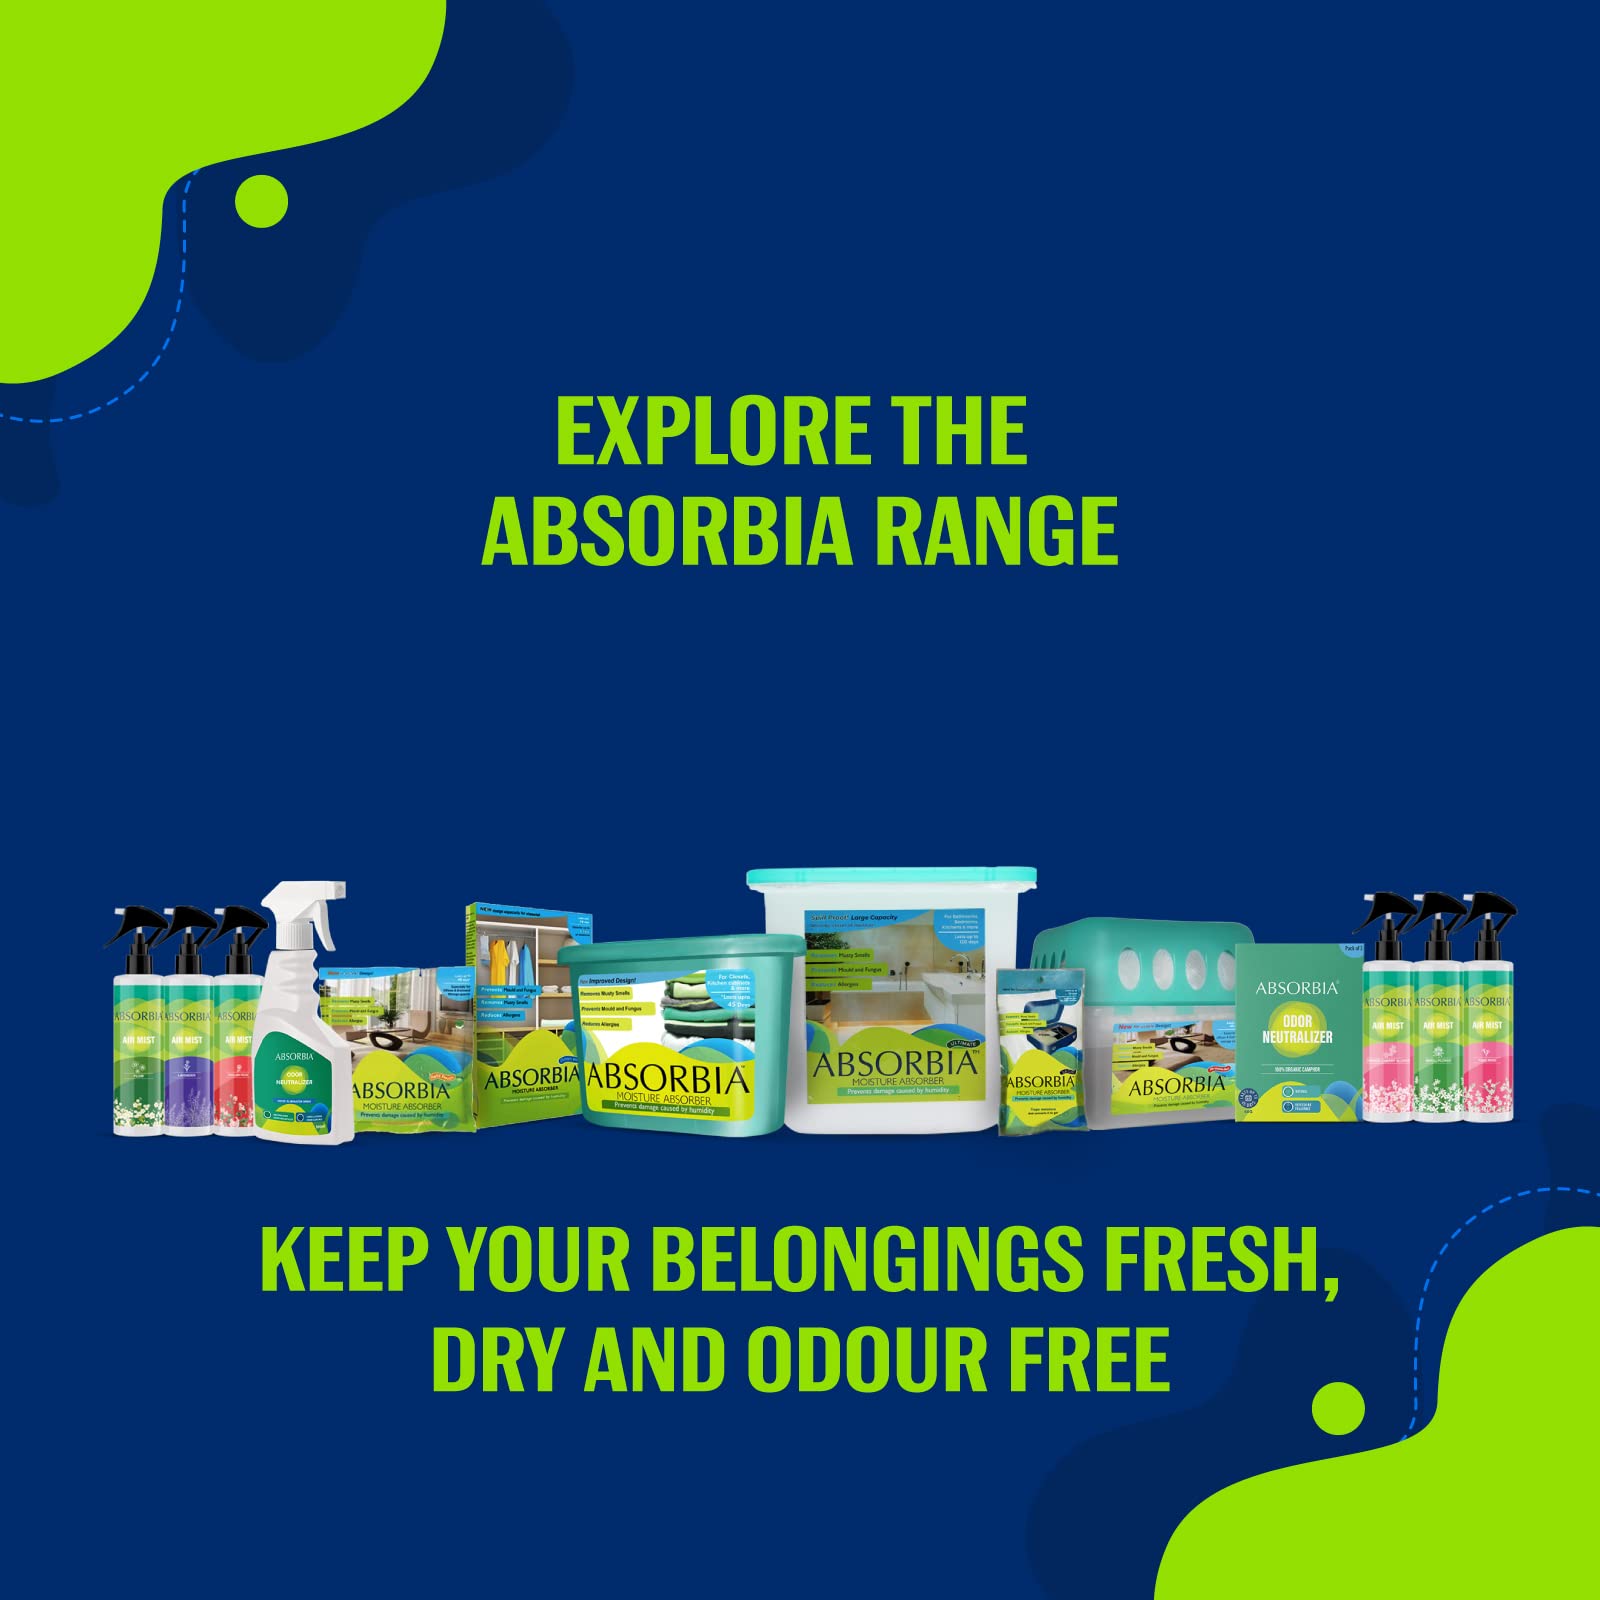 ABSORBIA Frago Ultimate Room Car and Air Freshener with the fragrance of Mountain Fresh pack of 6 | 400ml each Bottle | last upto 75 days (Approx) | Water based…